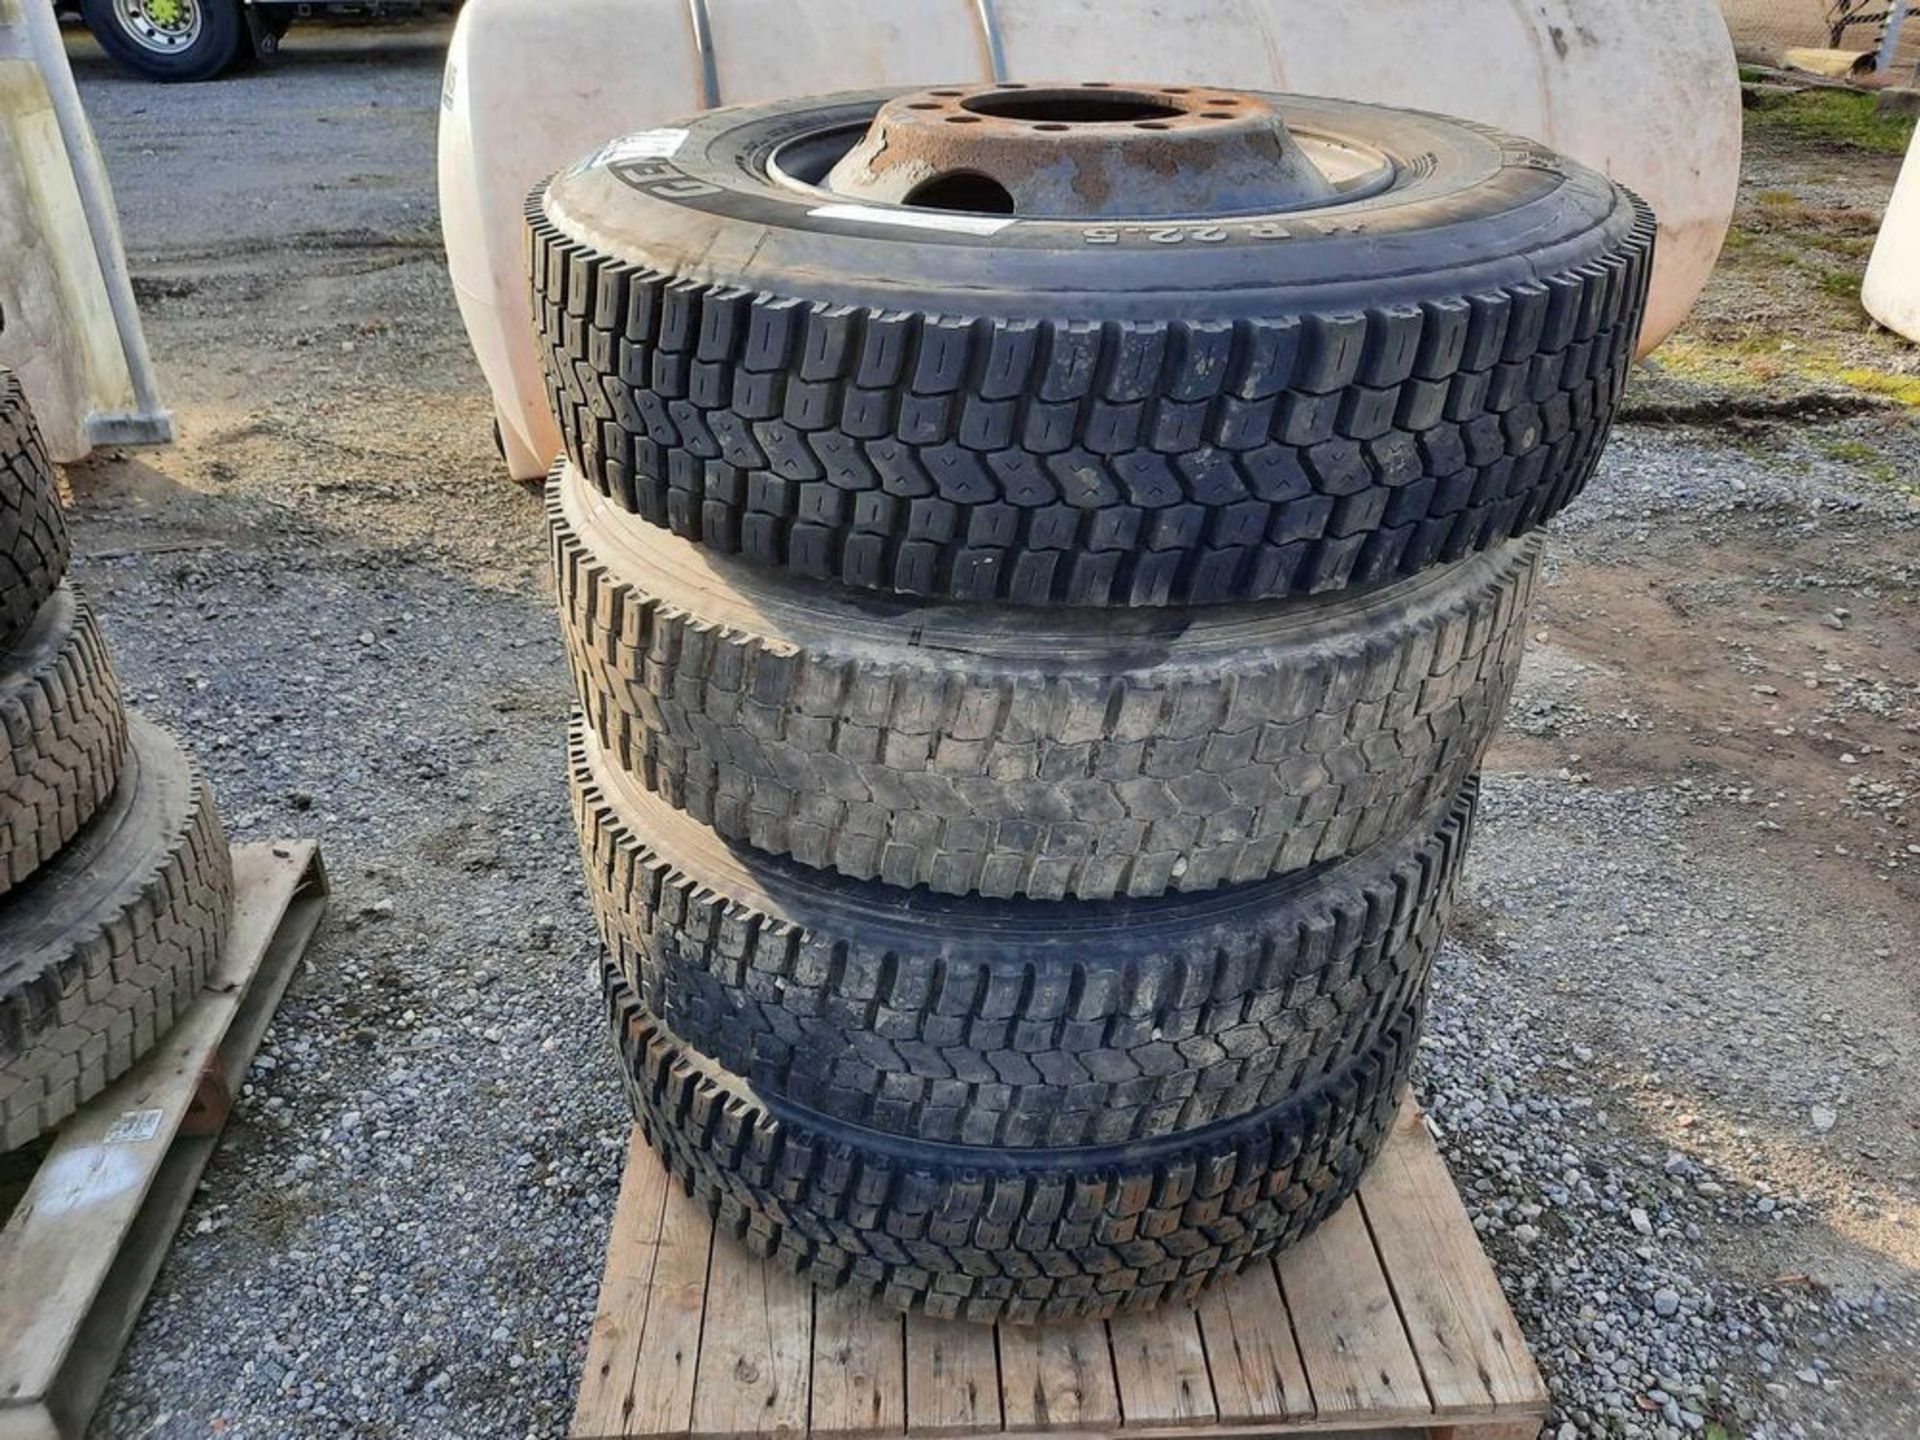 PALLET OF 4 ROAD TRACTOR/BUS TIRES (4 of 4 Pallets) - Image 3 of 5